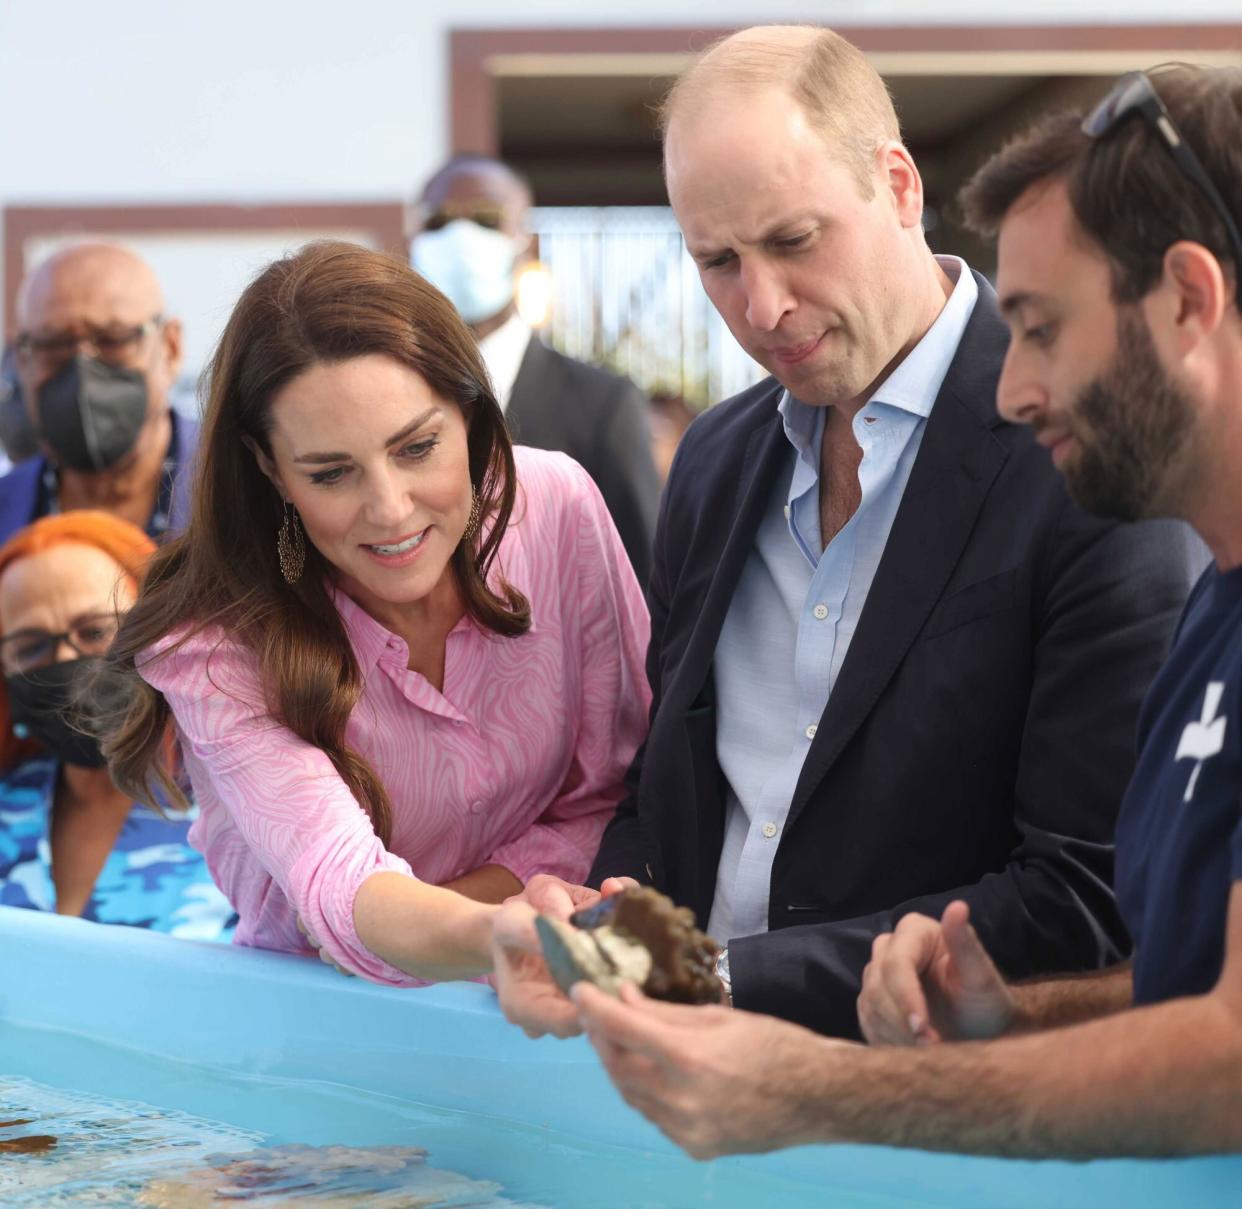 CORAL VITA, BAHAMAS - MARCH 26: Catherine, Duchess of Cambridge and Prince William, Duke of Cambridge visit 2021 Earthshot Prize Winner, Coral Vita on March 26, 2022 in Coral Vita, Bahamas. Coral Vita was the inaugural winner of the Revive Our Oceans Earthshot in recognition of their ground-breaking work to give new life to dying coral reefs. Their approach, which utilizes an innovative restoration funding model while farming corals on land before planting them into oceans, sees coral grow up to 50 times faster than traditional methods and improves their resilience to the impacts of climate change. (Photo by Ian Vogler - Pool/Getty Images)